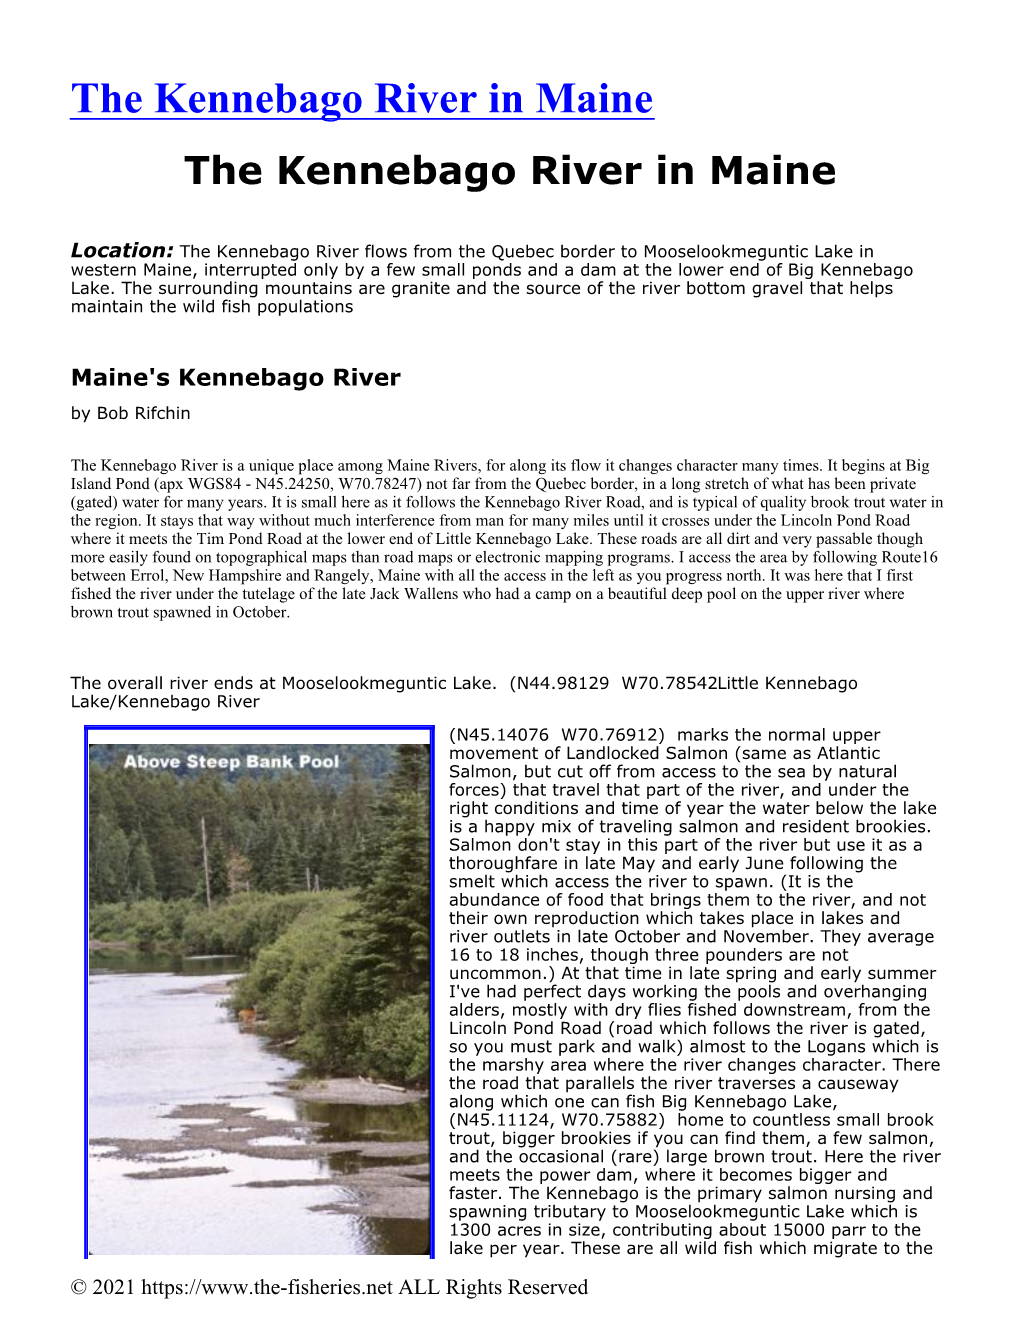 The Kennebago River in Maine the Kennebago River in Maine